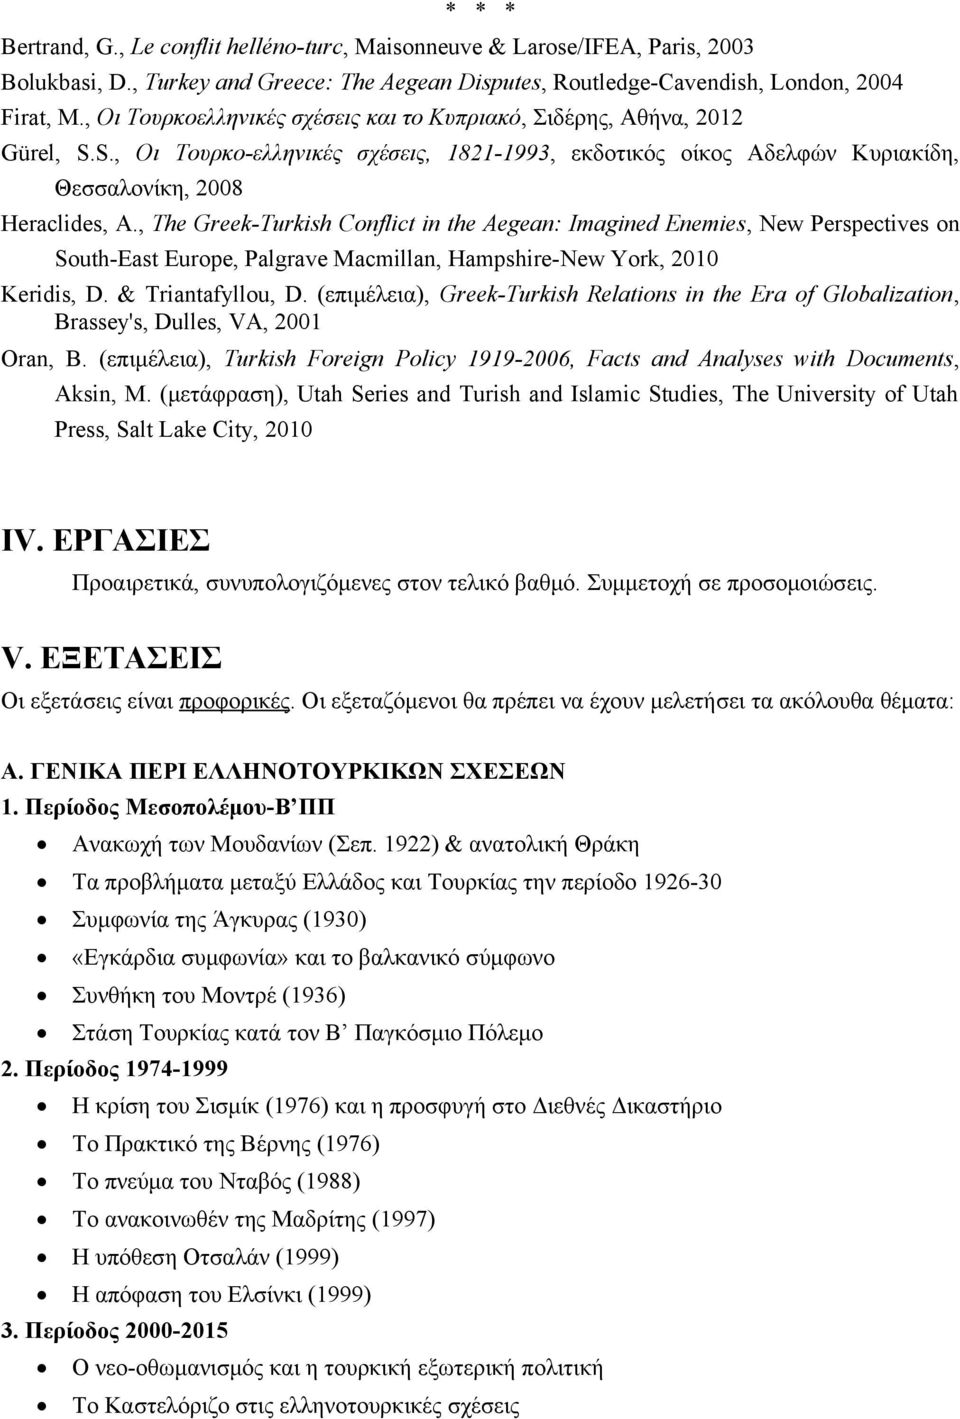 , The Greek-Turkish Conflict in the Aegean: Imagined Enemies, New Perspectives on South-East Europe, Palgrave Macmillan, Hampshire-New York, 2010 Keridis, D. & Triantafyllou, D.